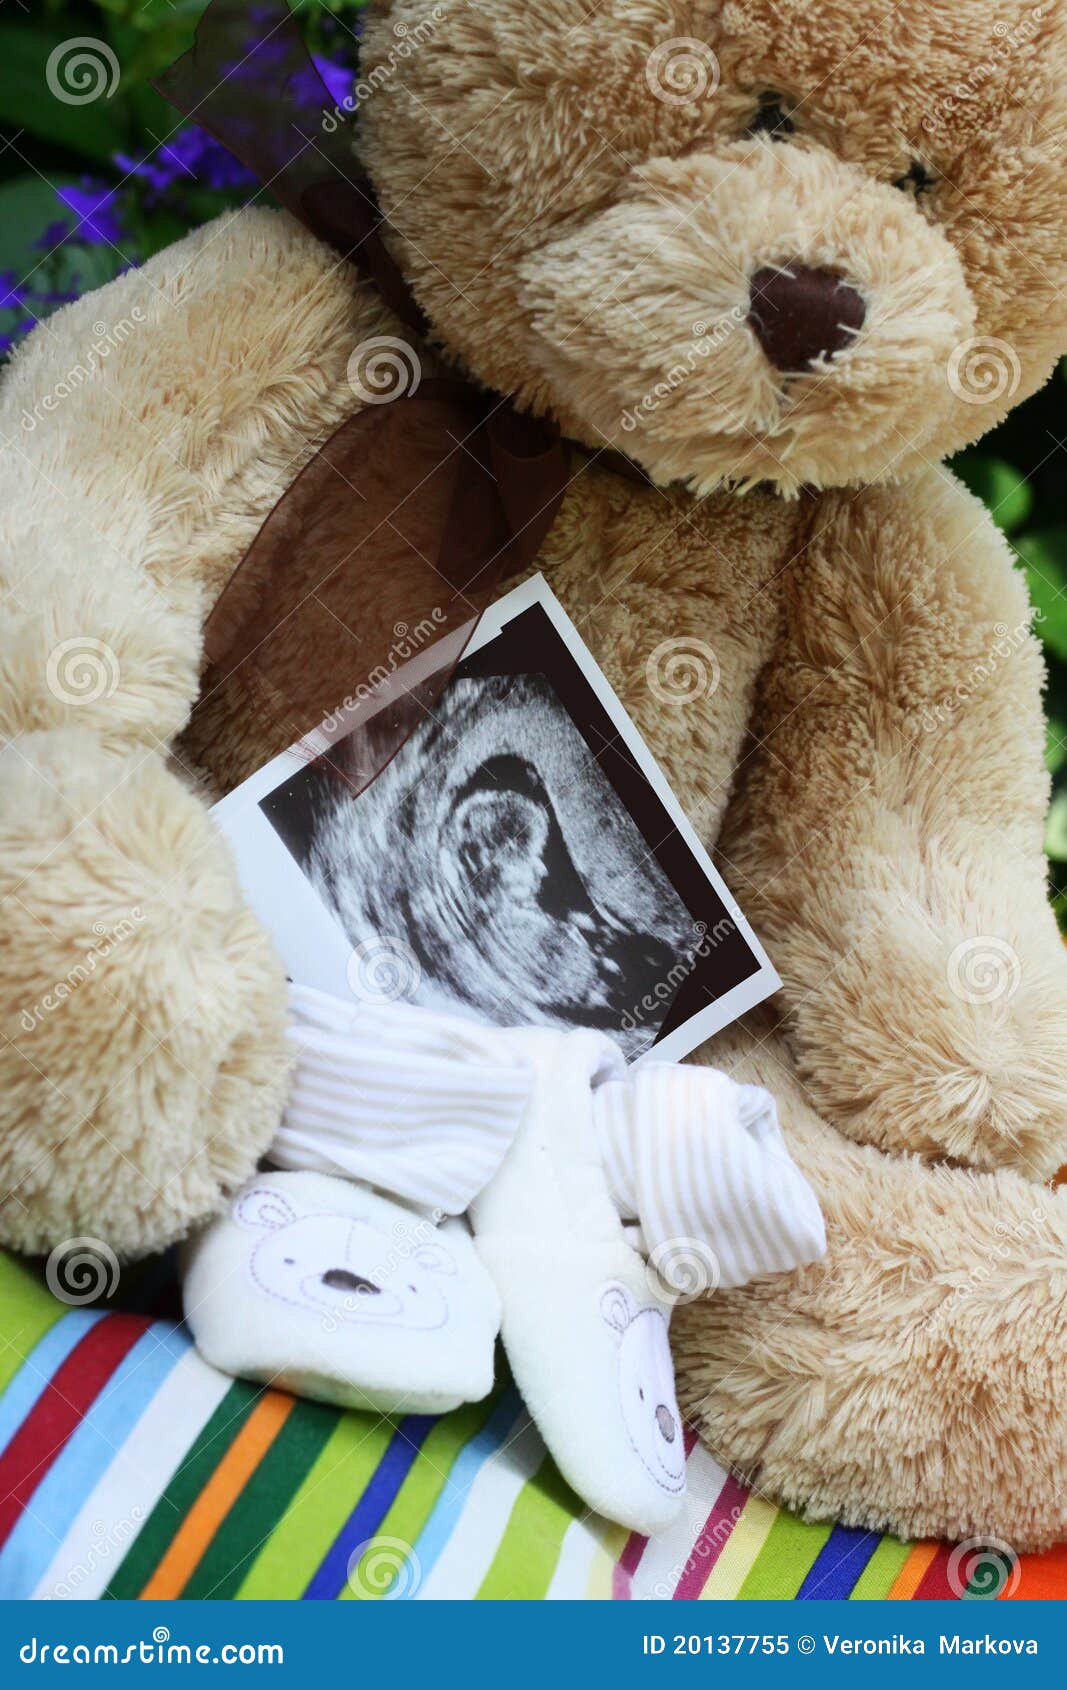 baby shoes and teddy bear and baby ultrasound